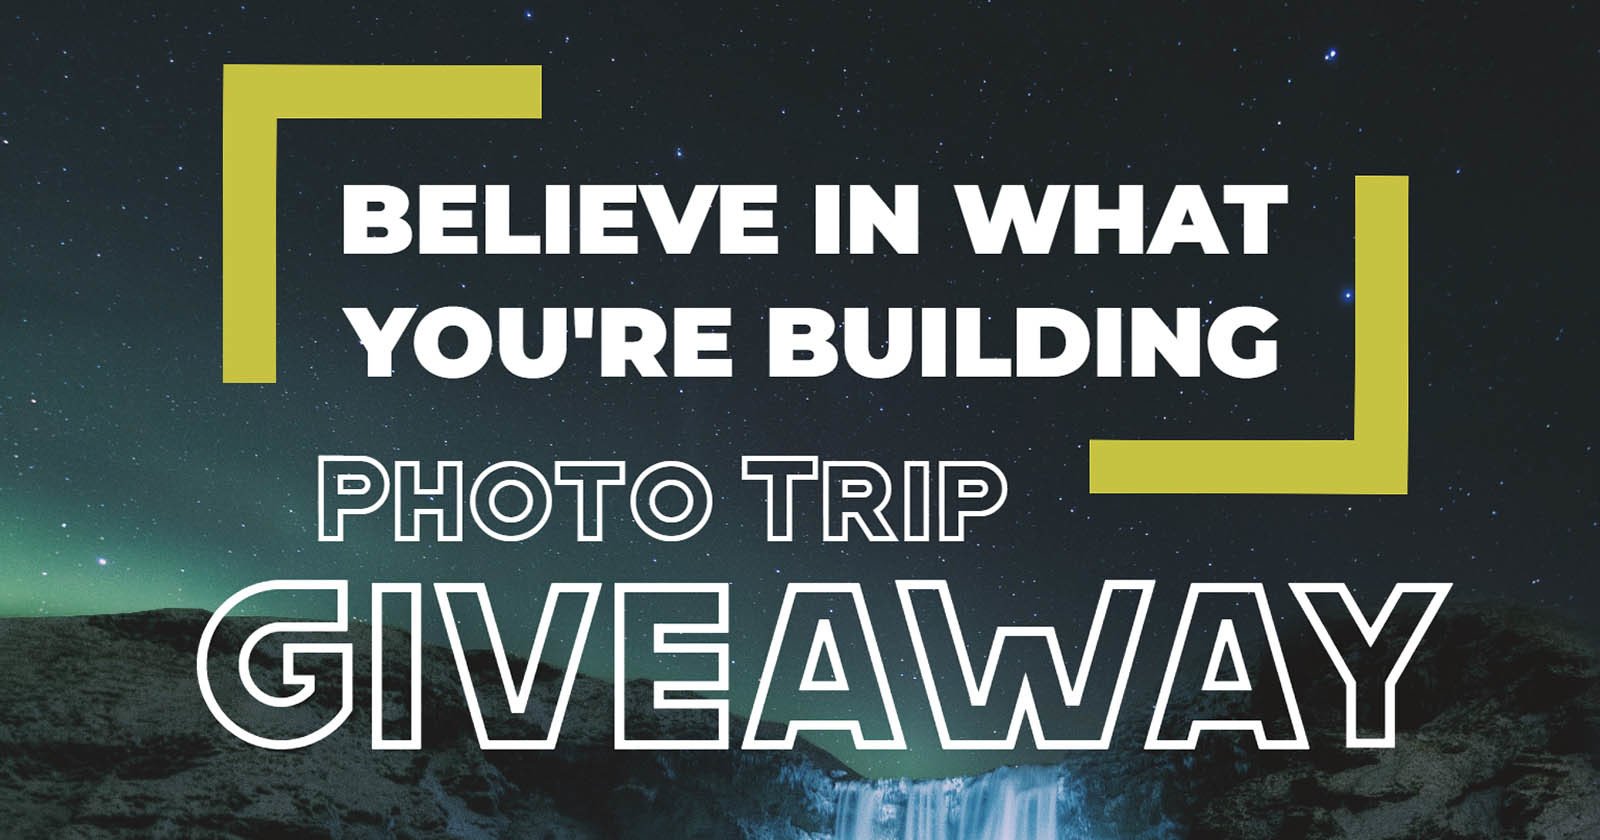 Believe in What You’re Building and Win a Photo Trip